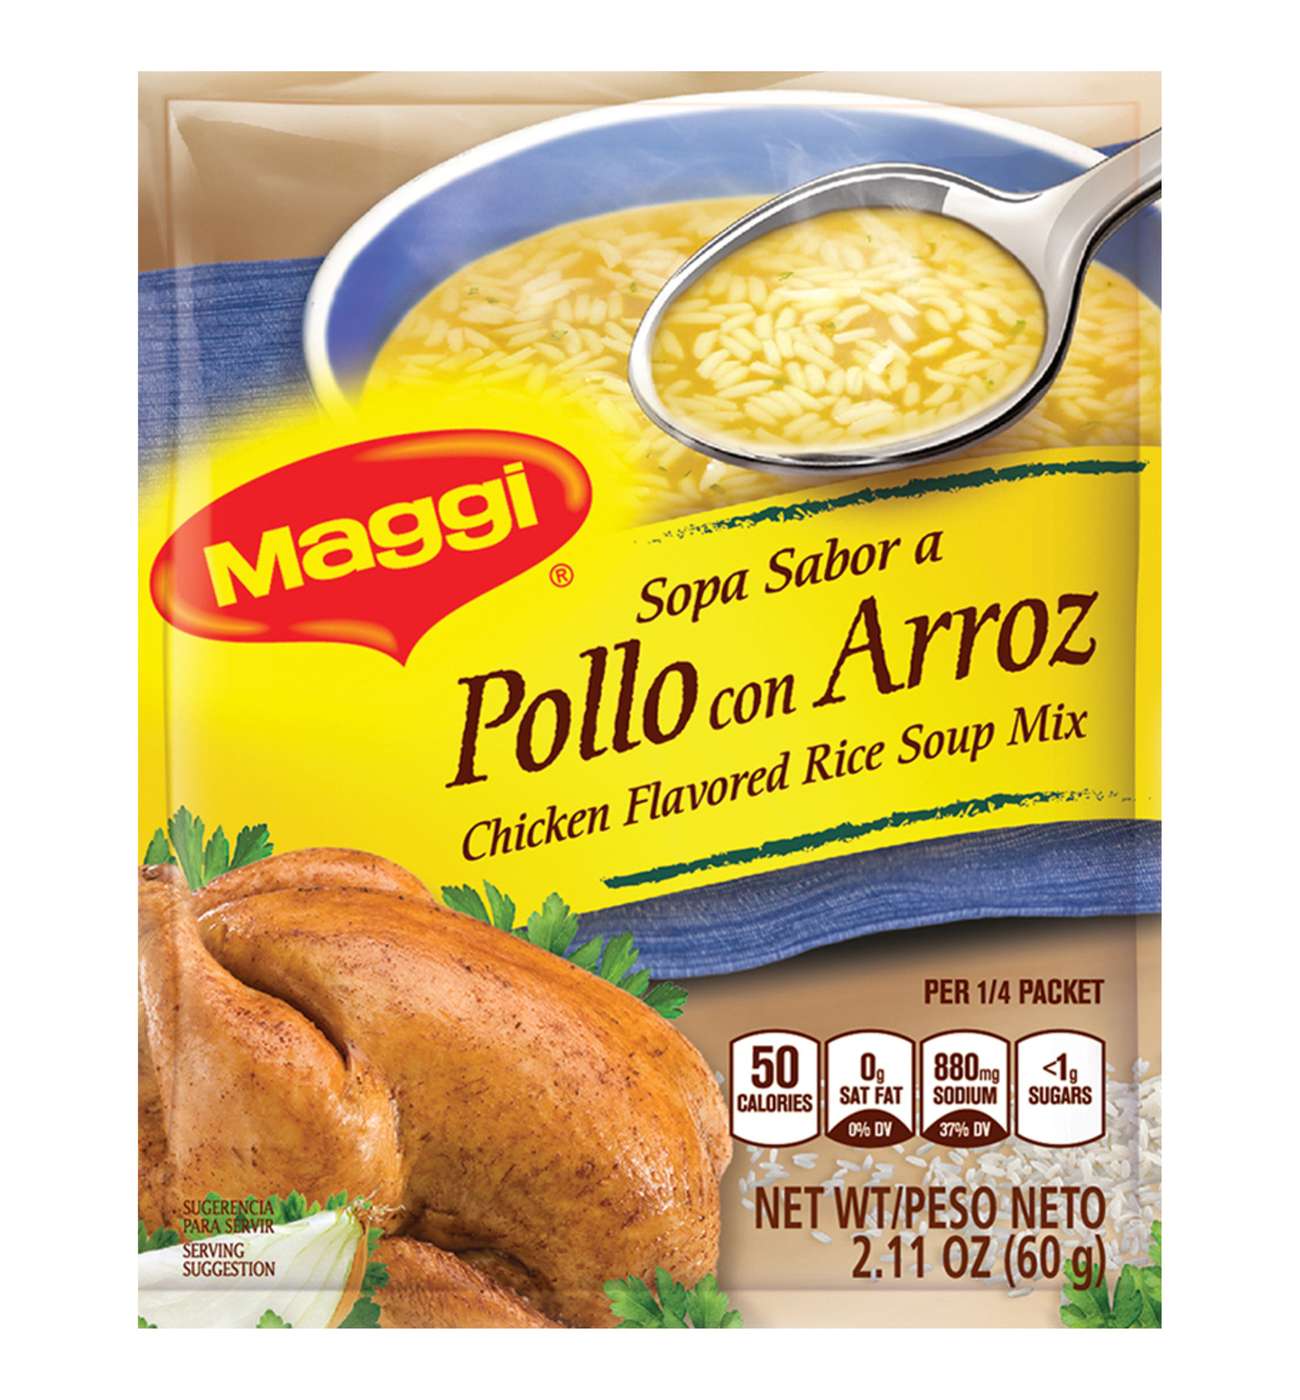 Maggi Chicken Flavored Rice Soup Mix; image 1 of 7